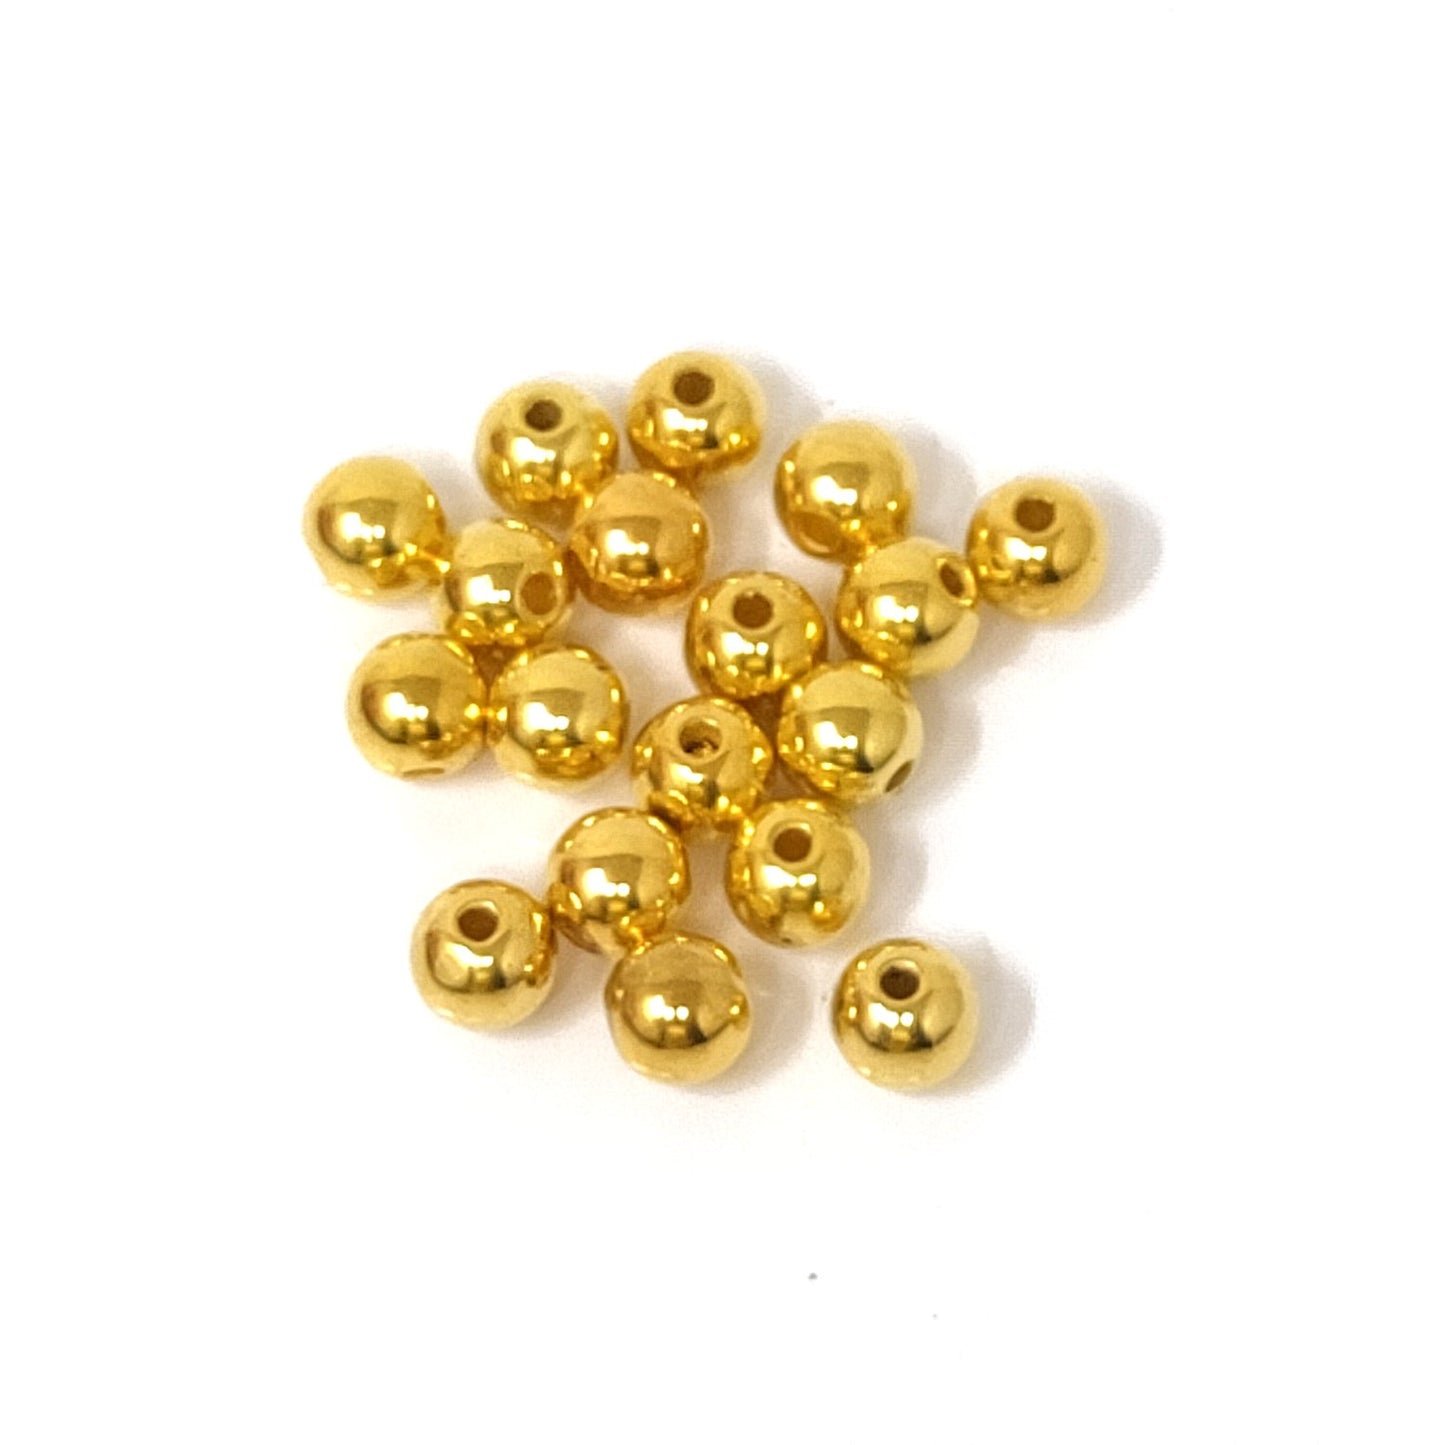 8 mm Golden Plastic Beads for Jewellery Making and Decoration (100 Beads) - 96-06